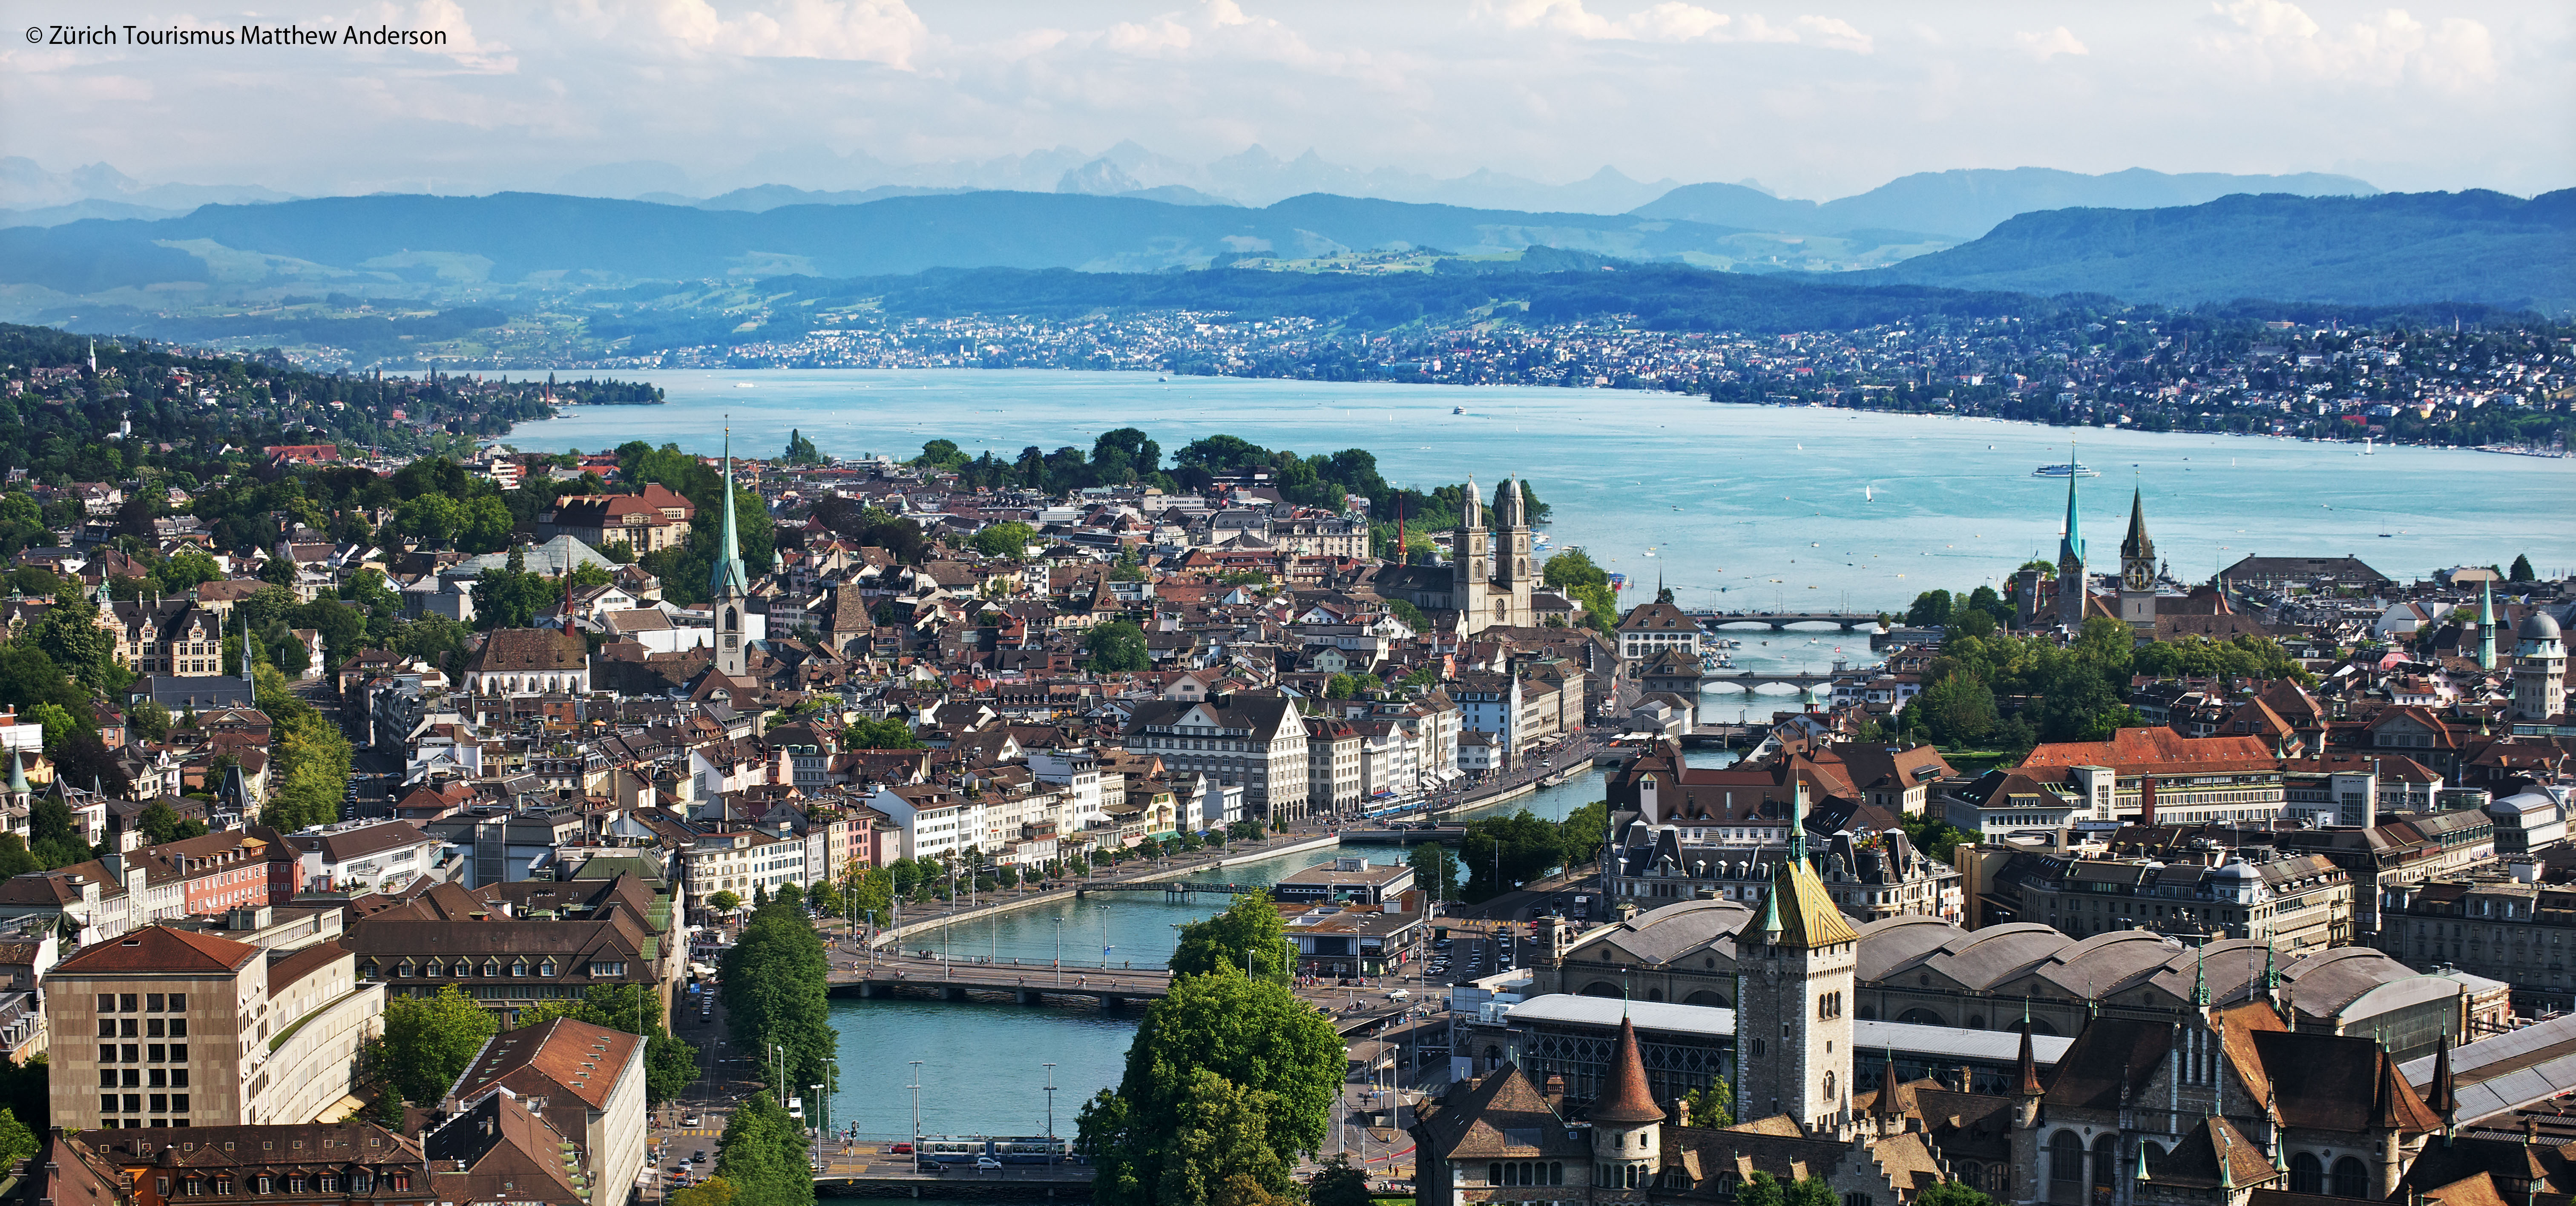 Man Made Zurich wallpapers (Desktop, Phone, Tablet) - Awesome ...